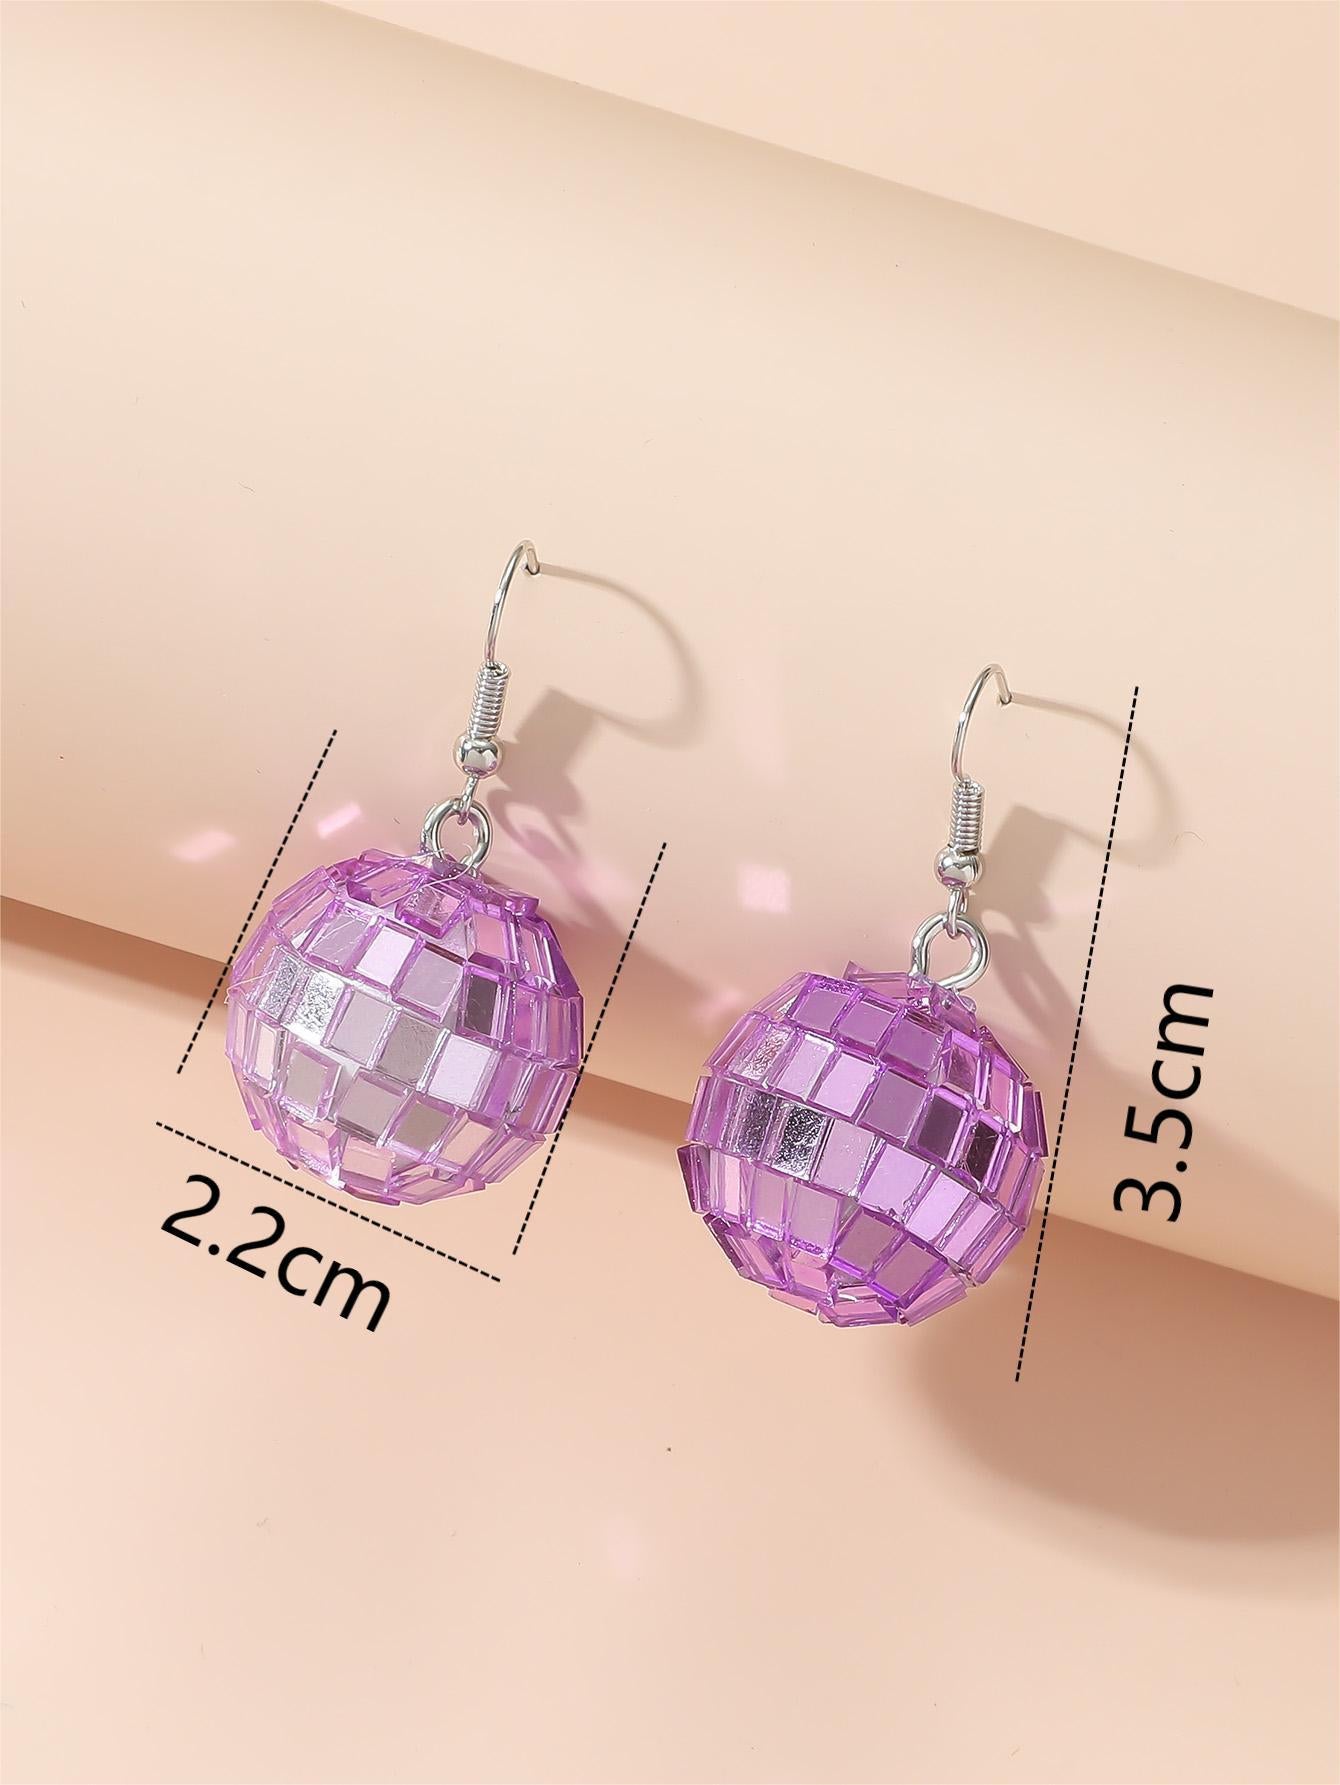 Taylor Mirror Ball Inspired Earrings LOONFUNG Disco Ball Earrings